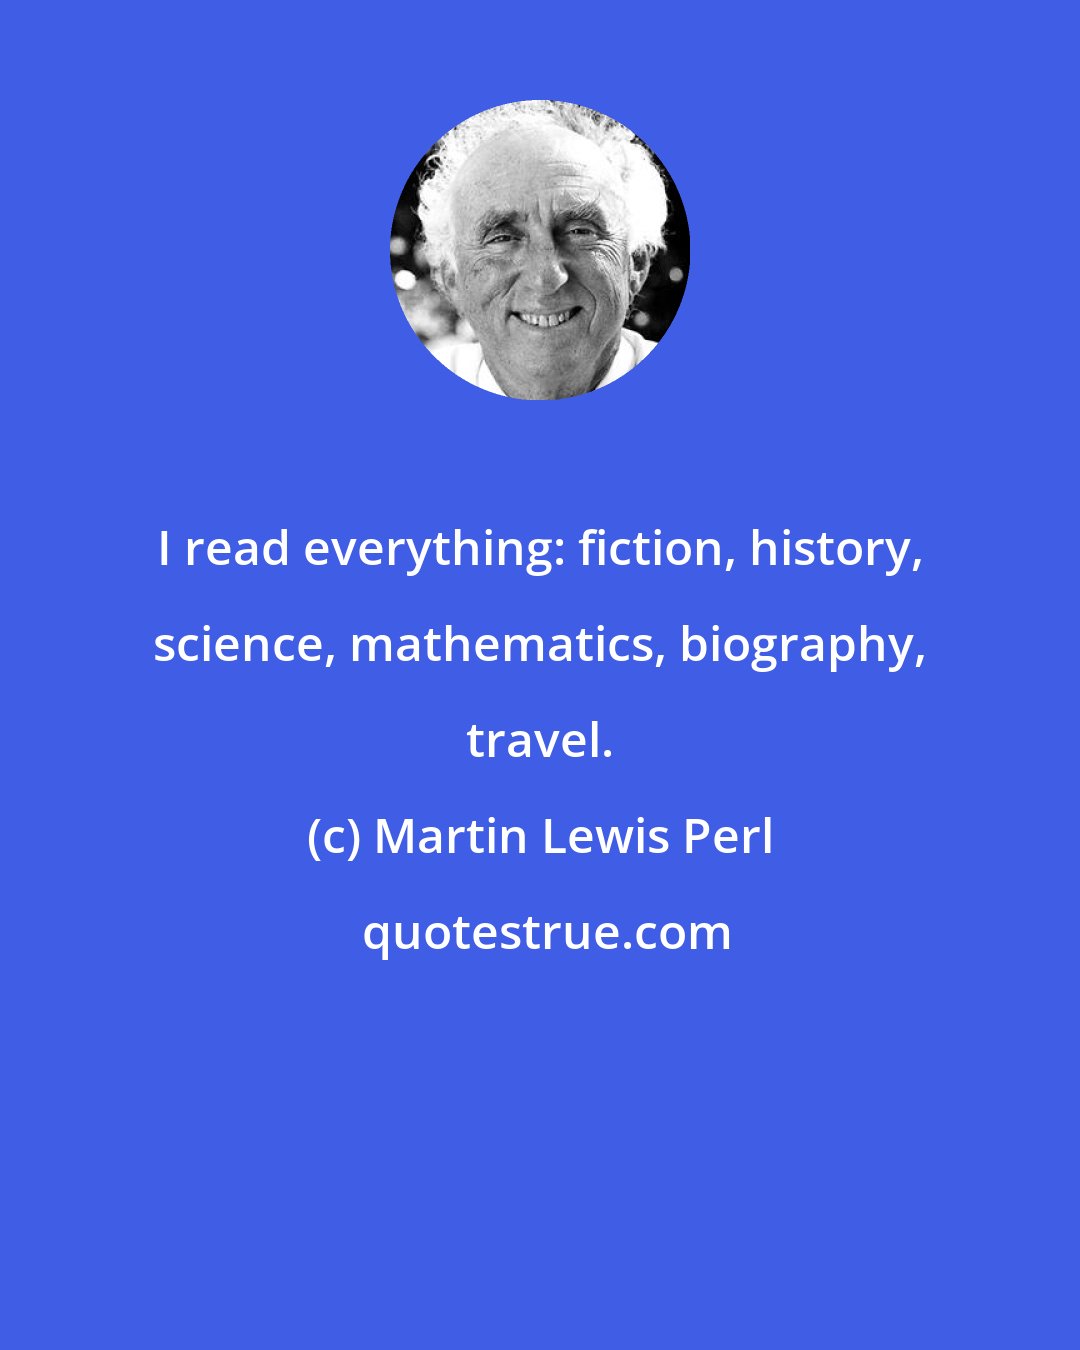 Martin Lewis Perl: I read everything: fiction, history, science, mathematics, biography, travel.